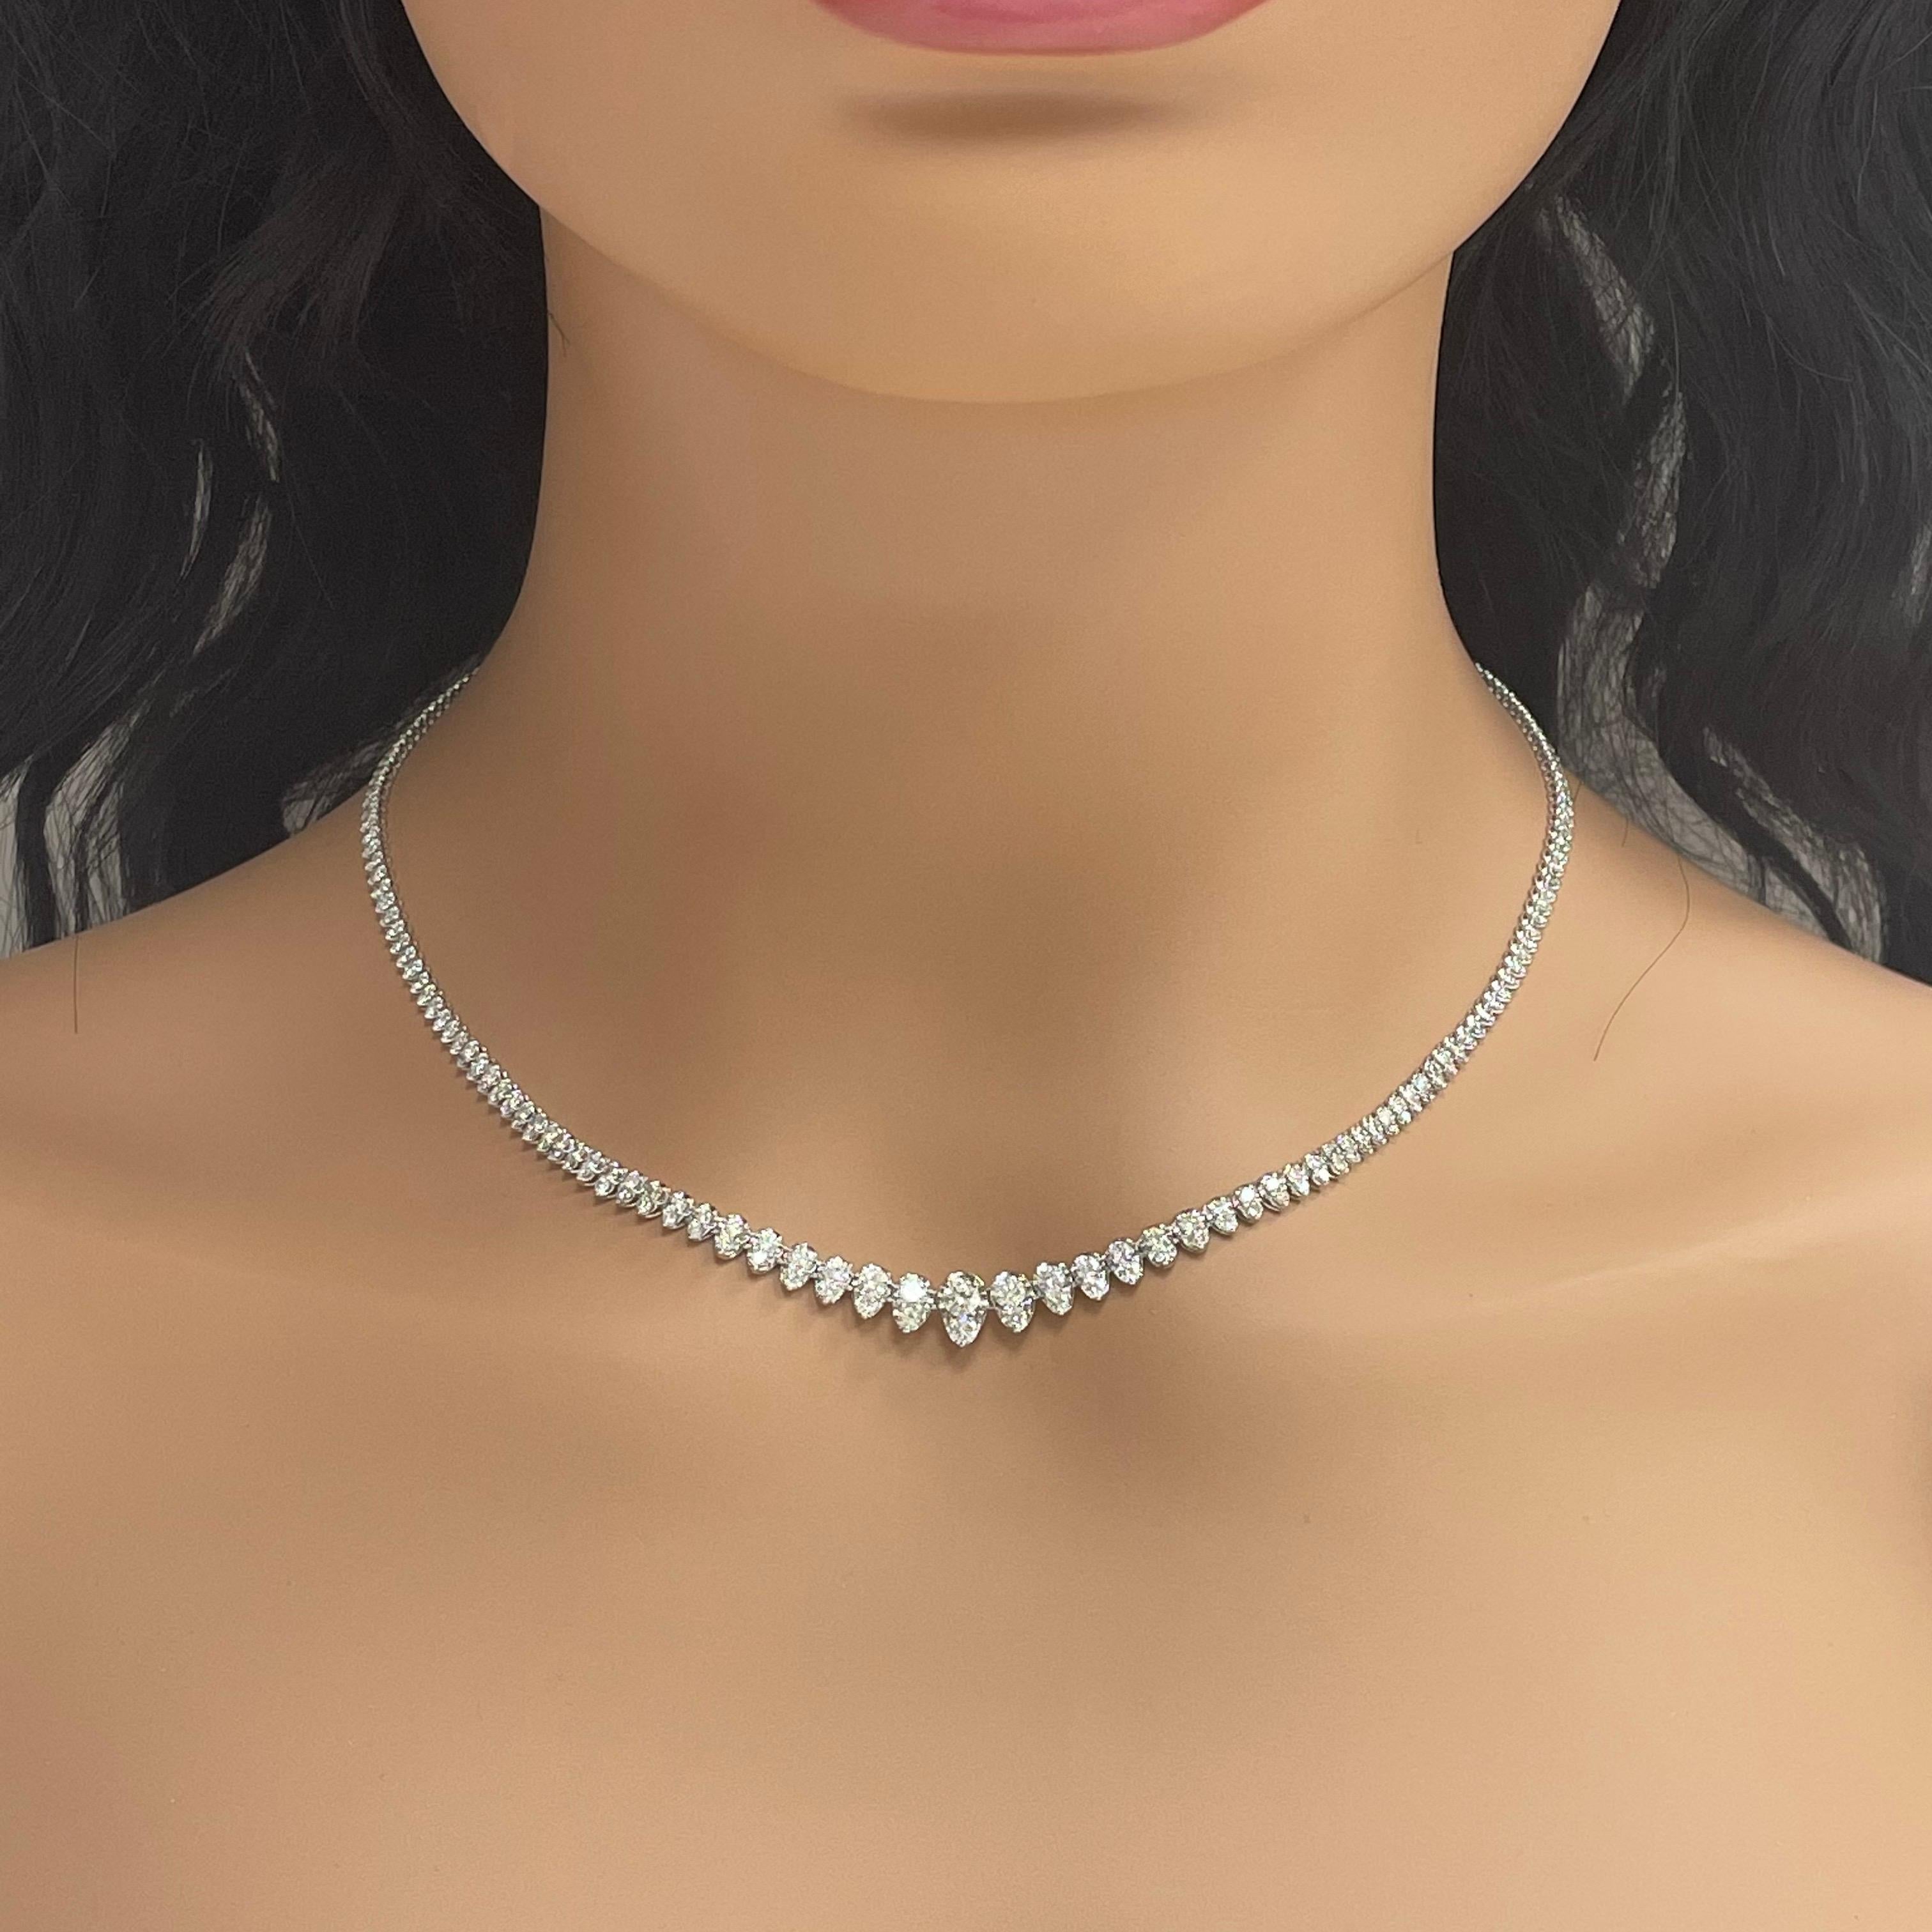 Details about   25Ct Brilliant Pear Cut Diamond Tennis Necklaces In Solid 14K White Gold Over 